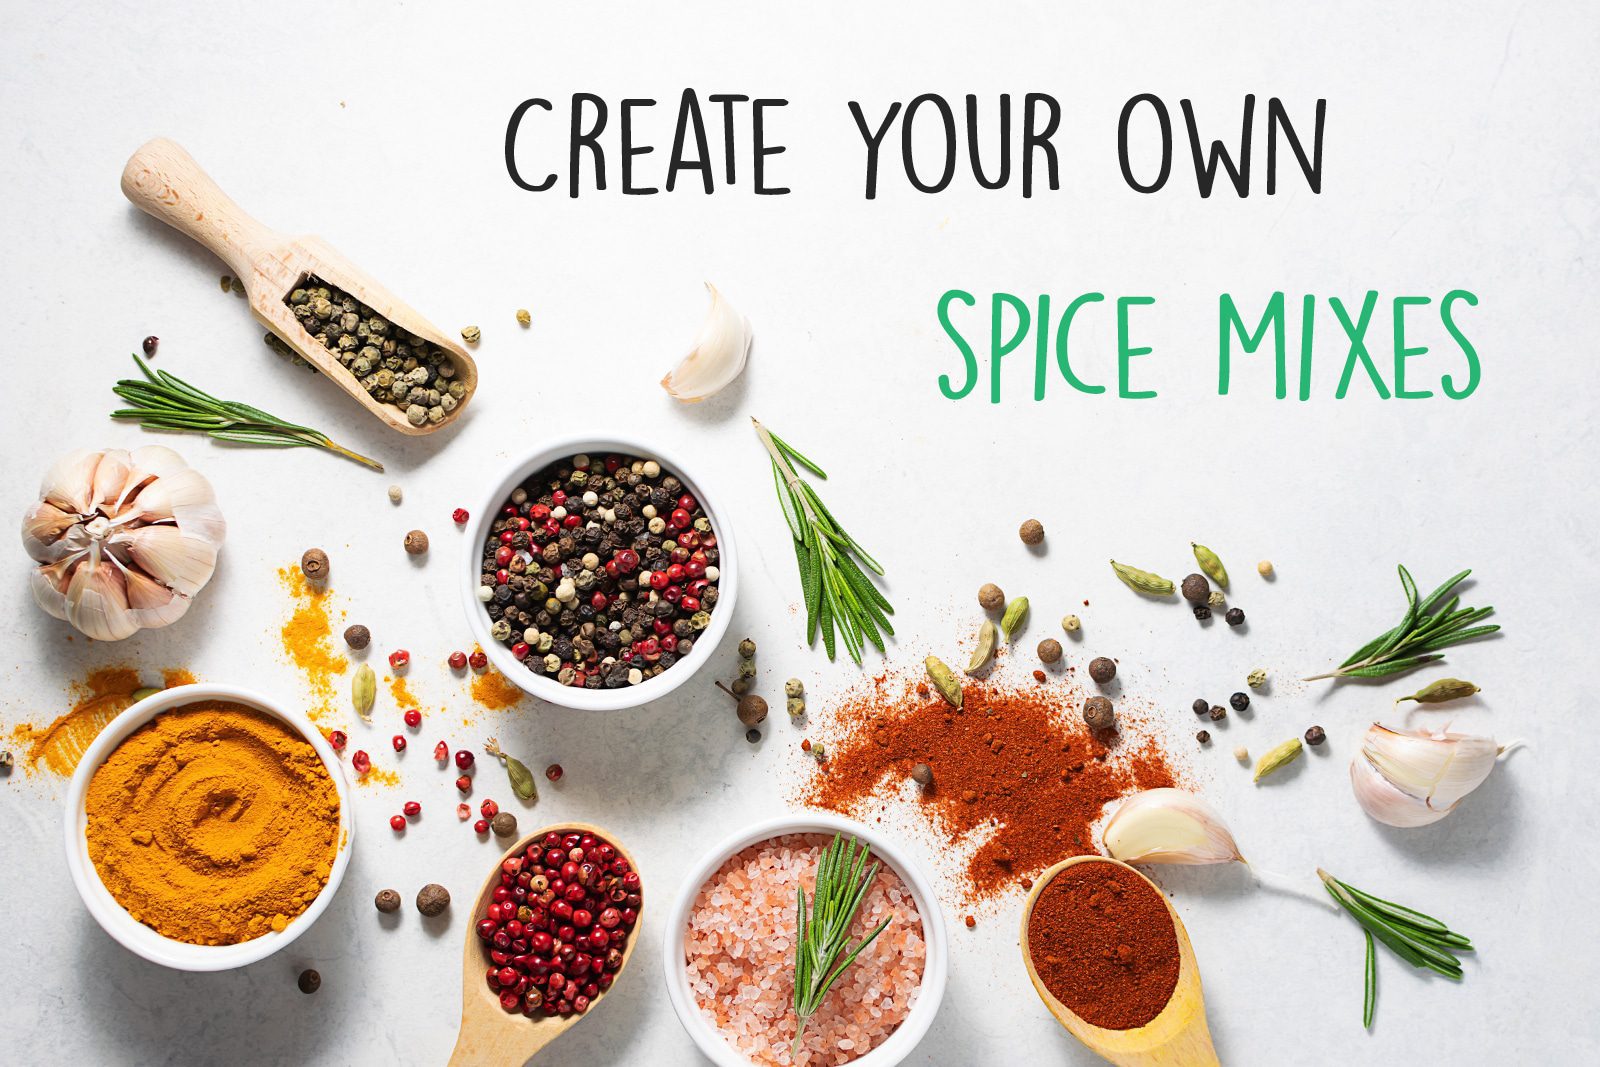 DIY: Make your own spice blends and seasonings